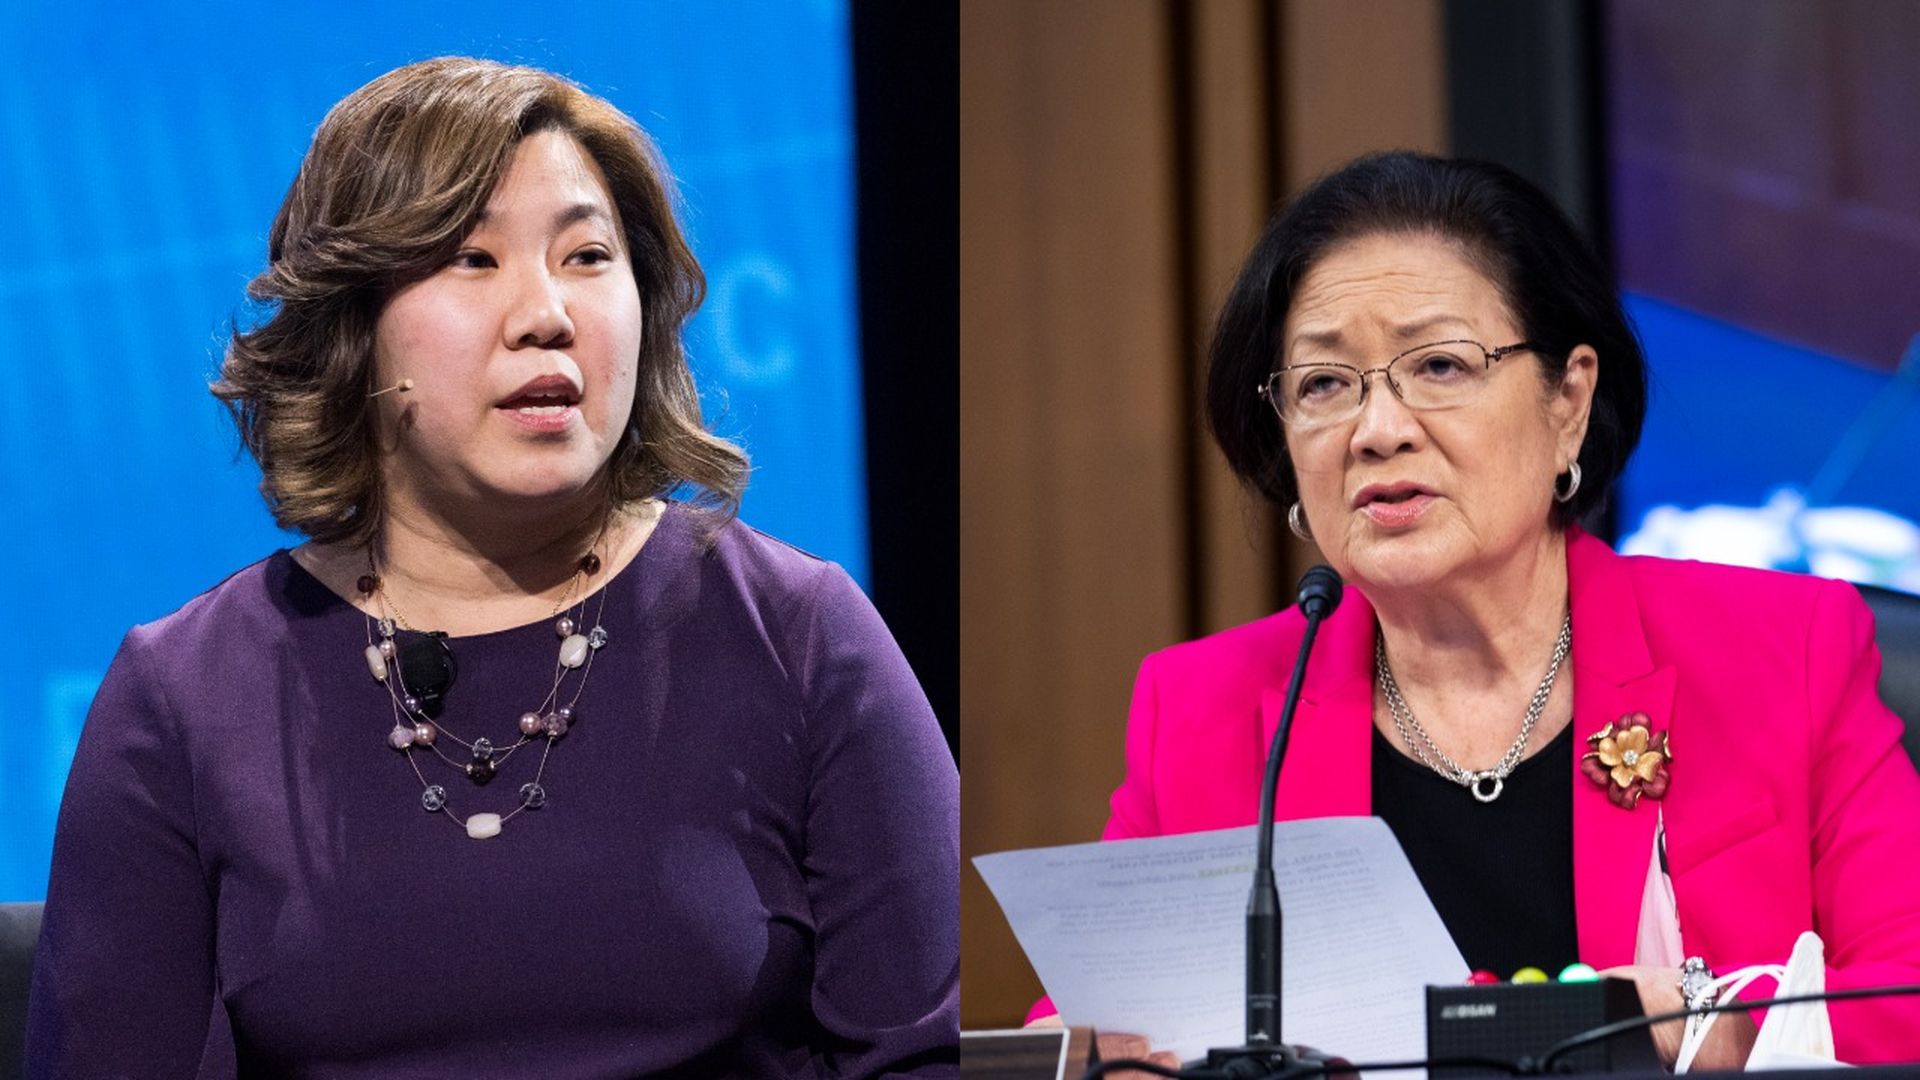 Photo of Grace Meng on the left and Mazie Hirono on the right